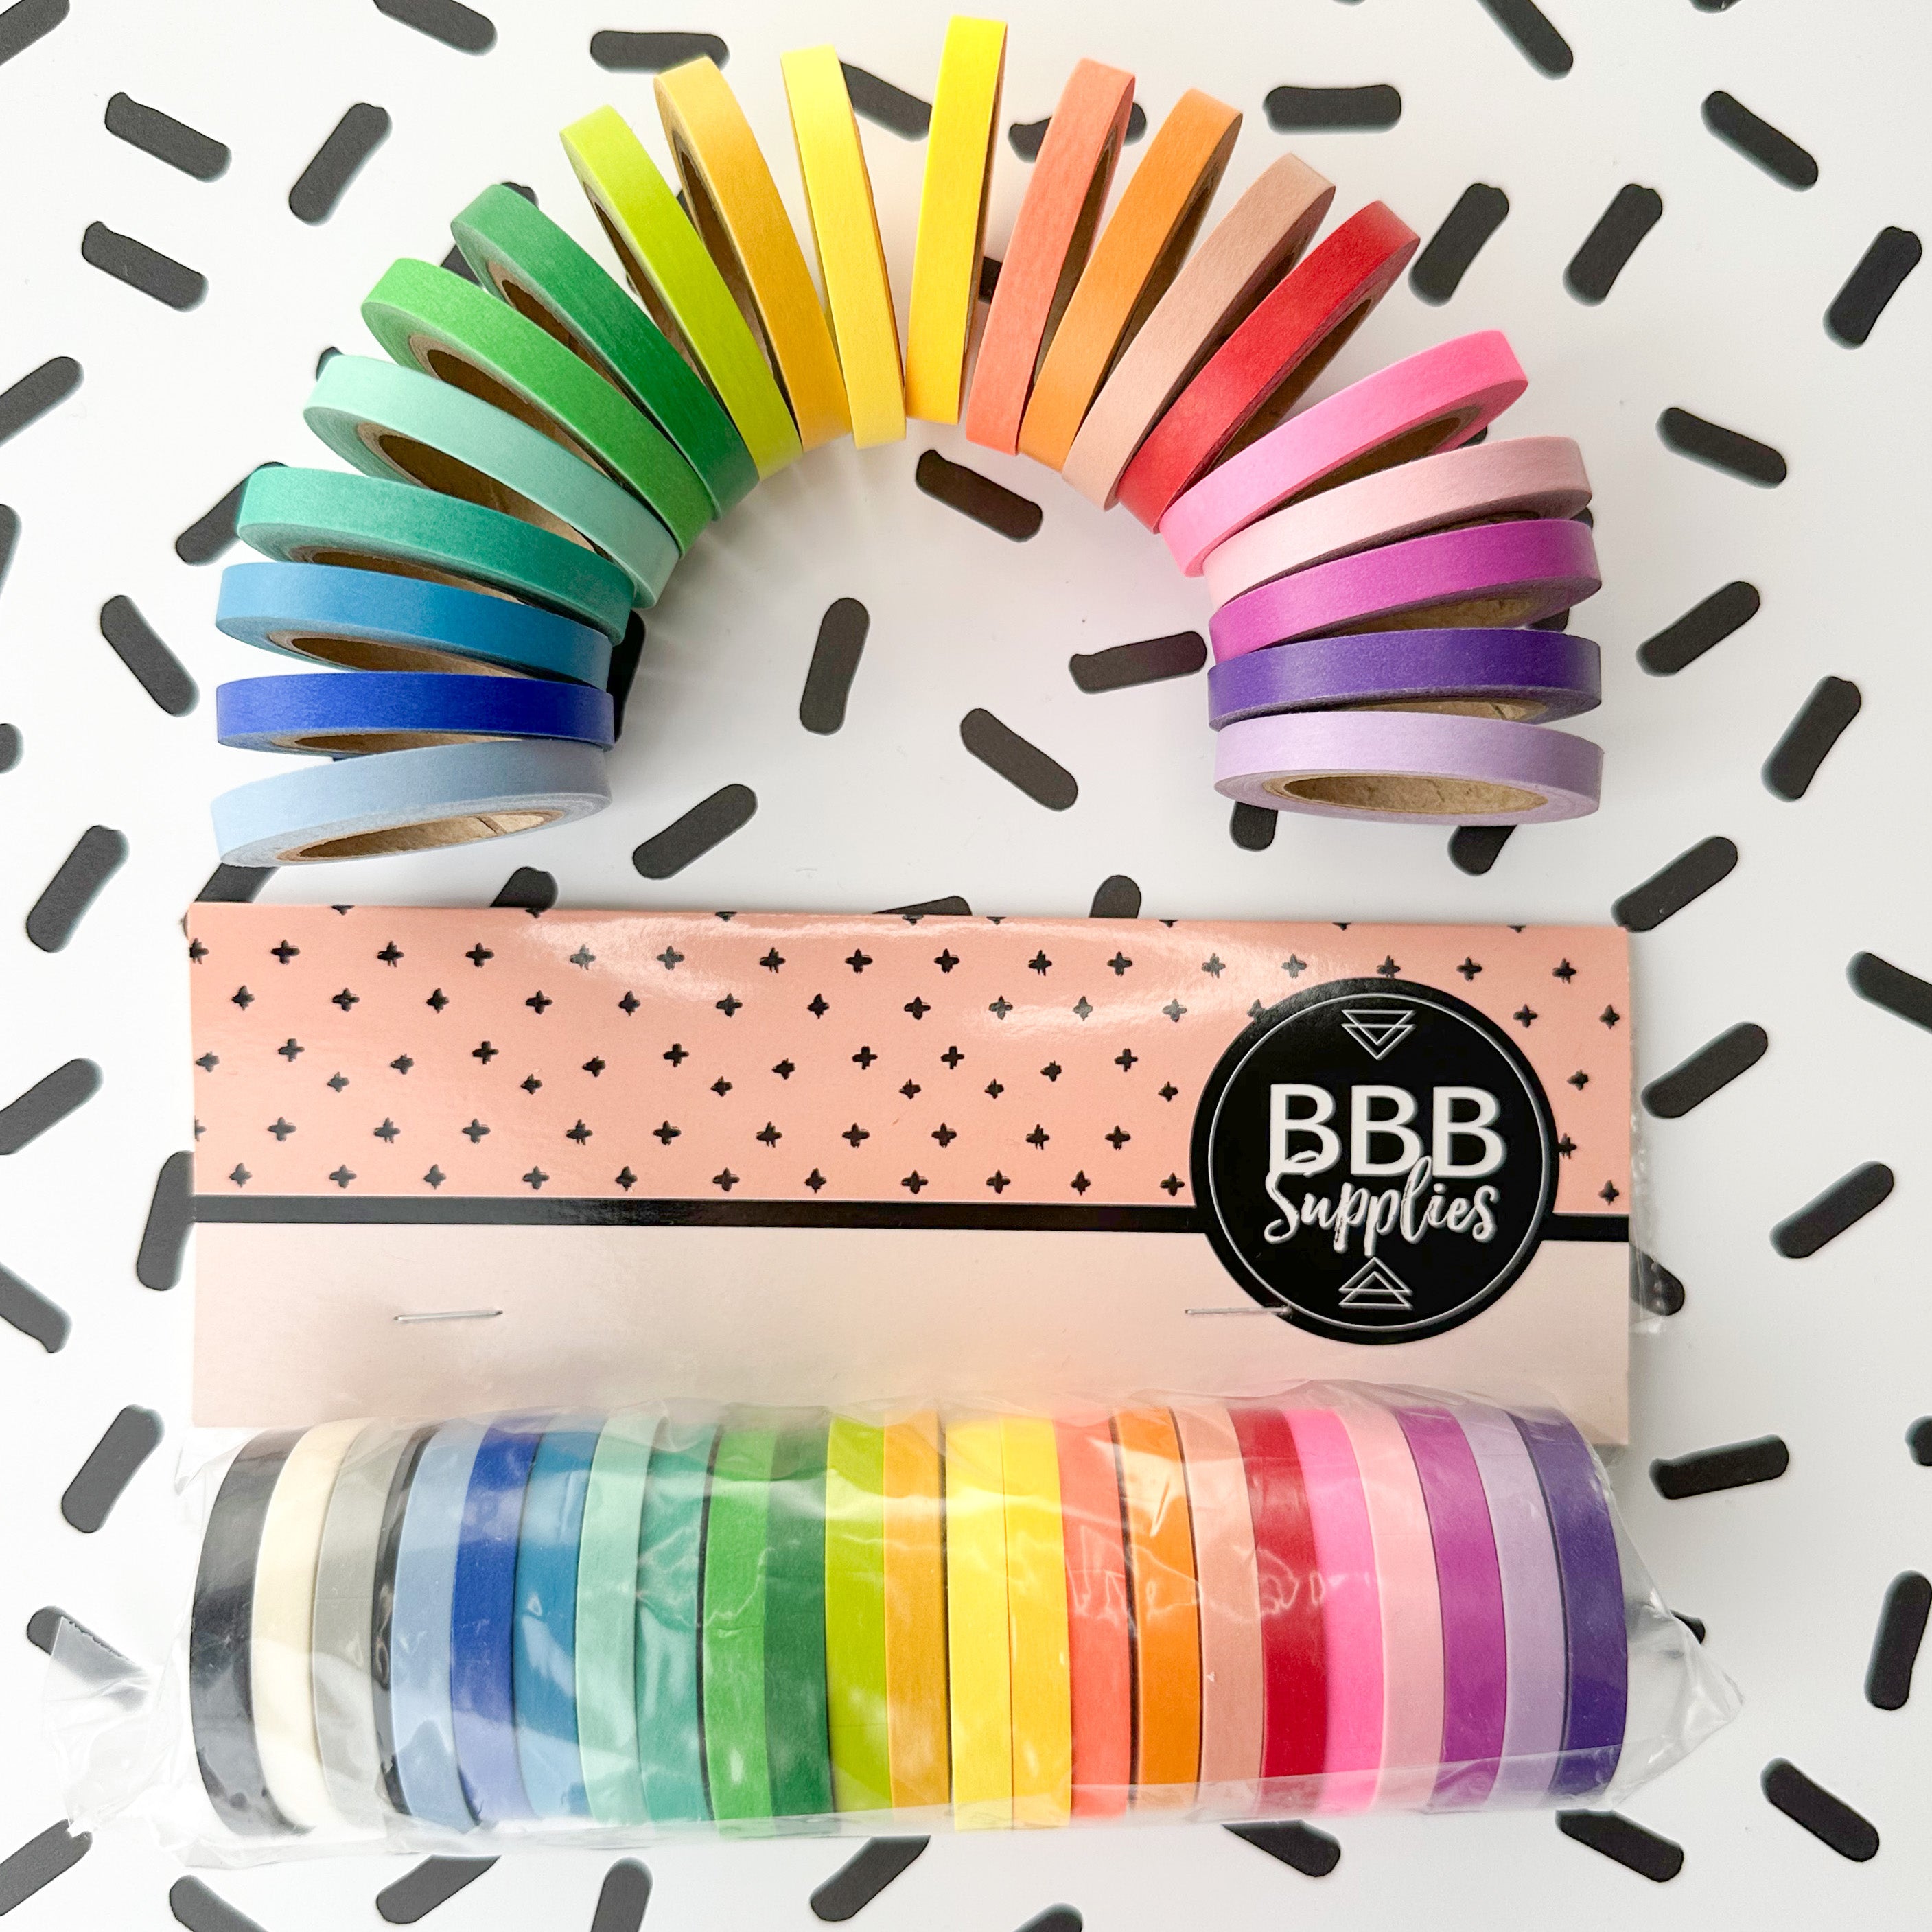 Add a pop of vibrant color to your crafts with our set of 23 rainbow-colored narrow solid color washi tapes, perfect for adding accents and borders to your projects. This set is sold only at BBB Supplies Craft Shop.